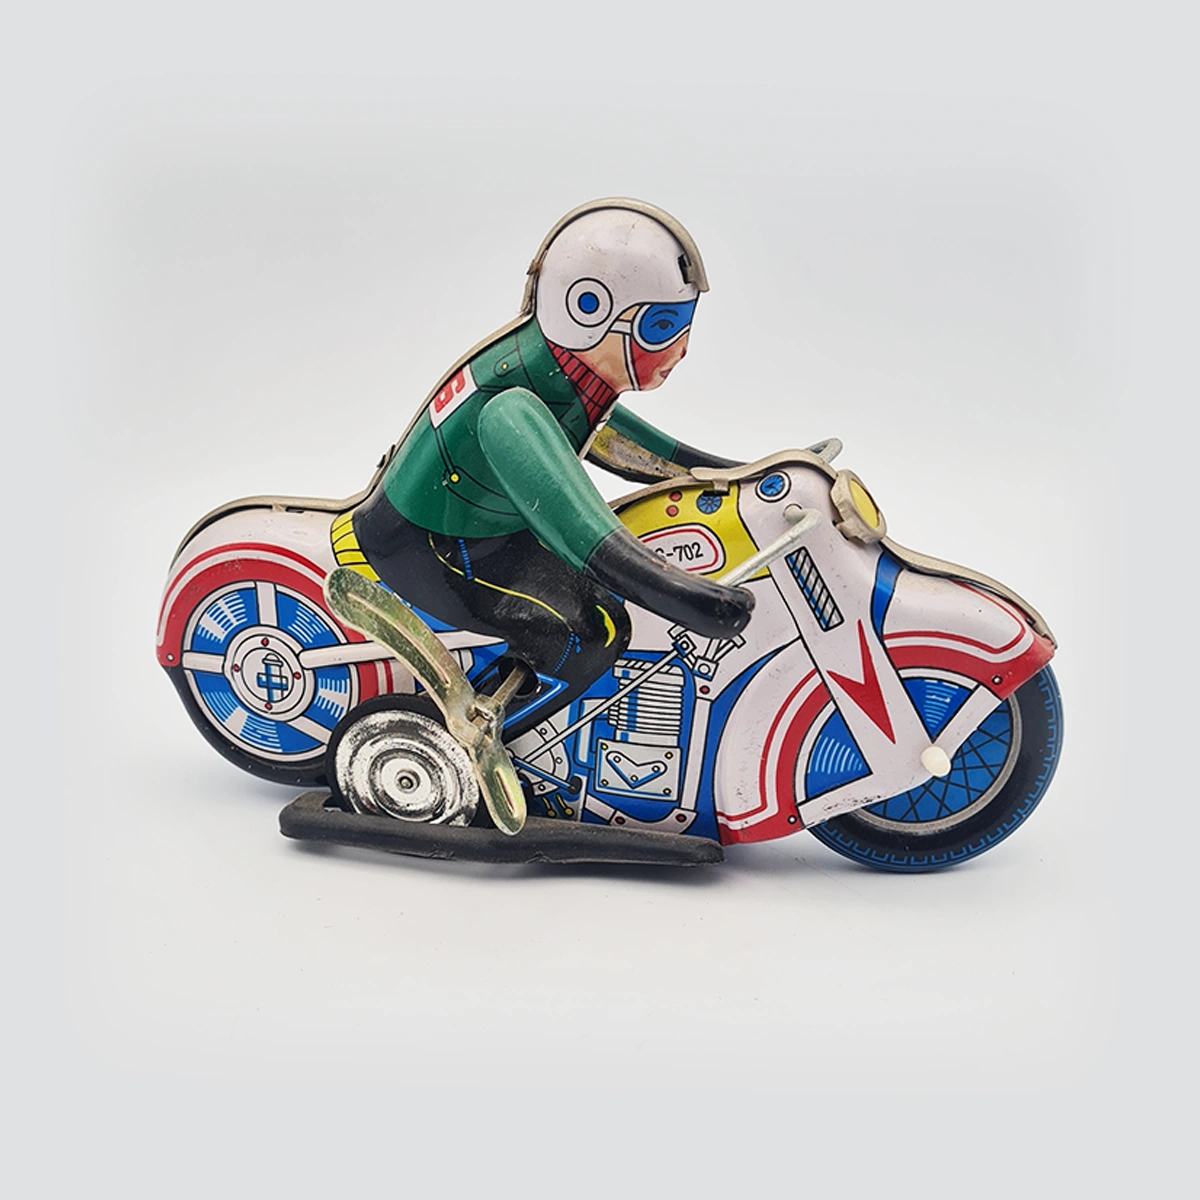 Vintage Tin Toy Motorcycle Rider China MS-702 602 Old Wind Up Friction Motor Man 2